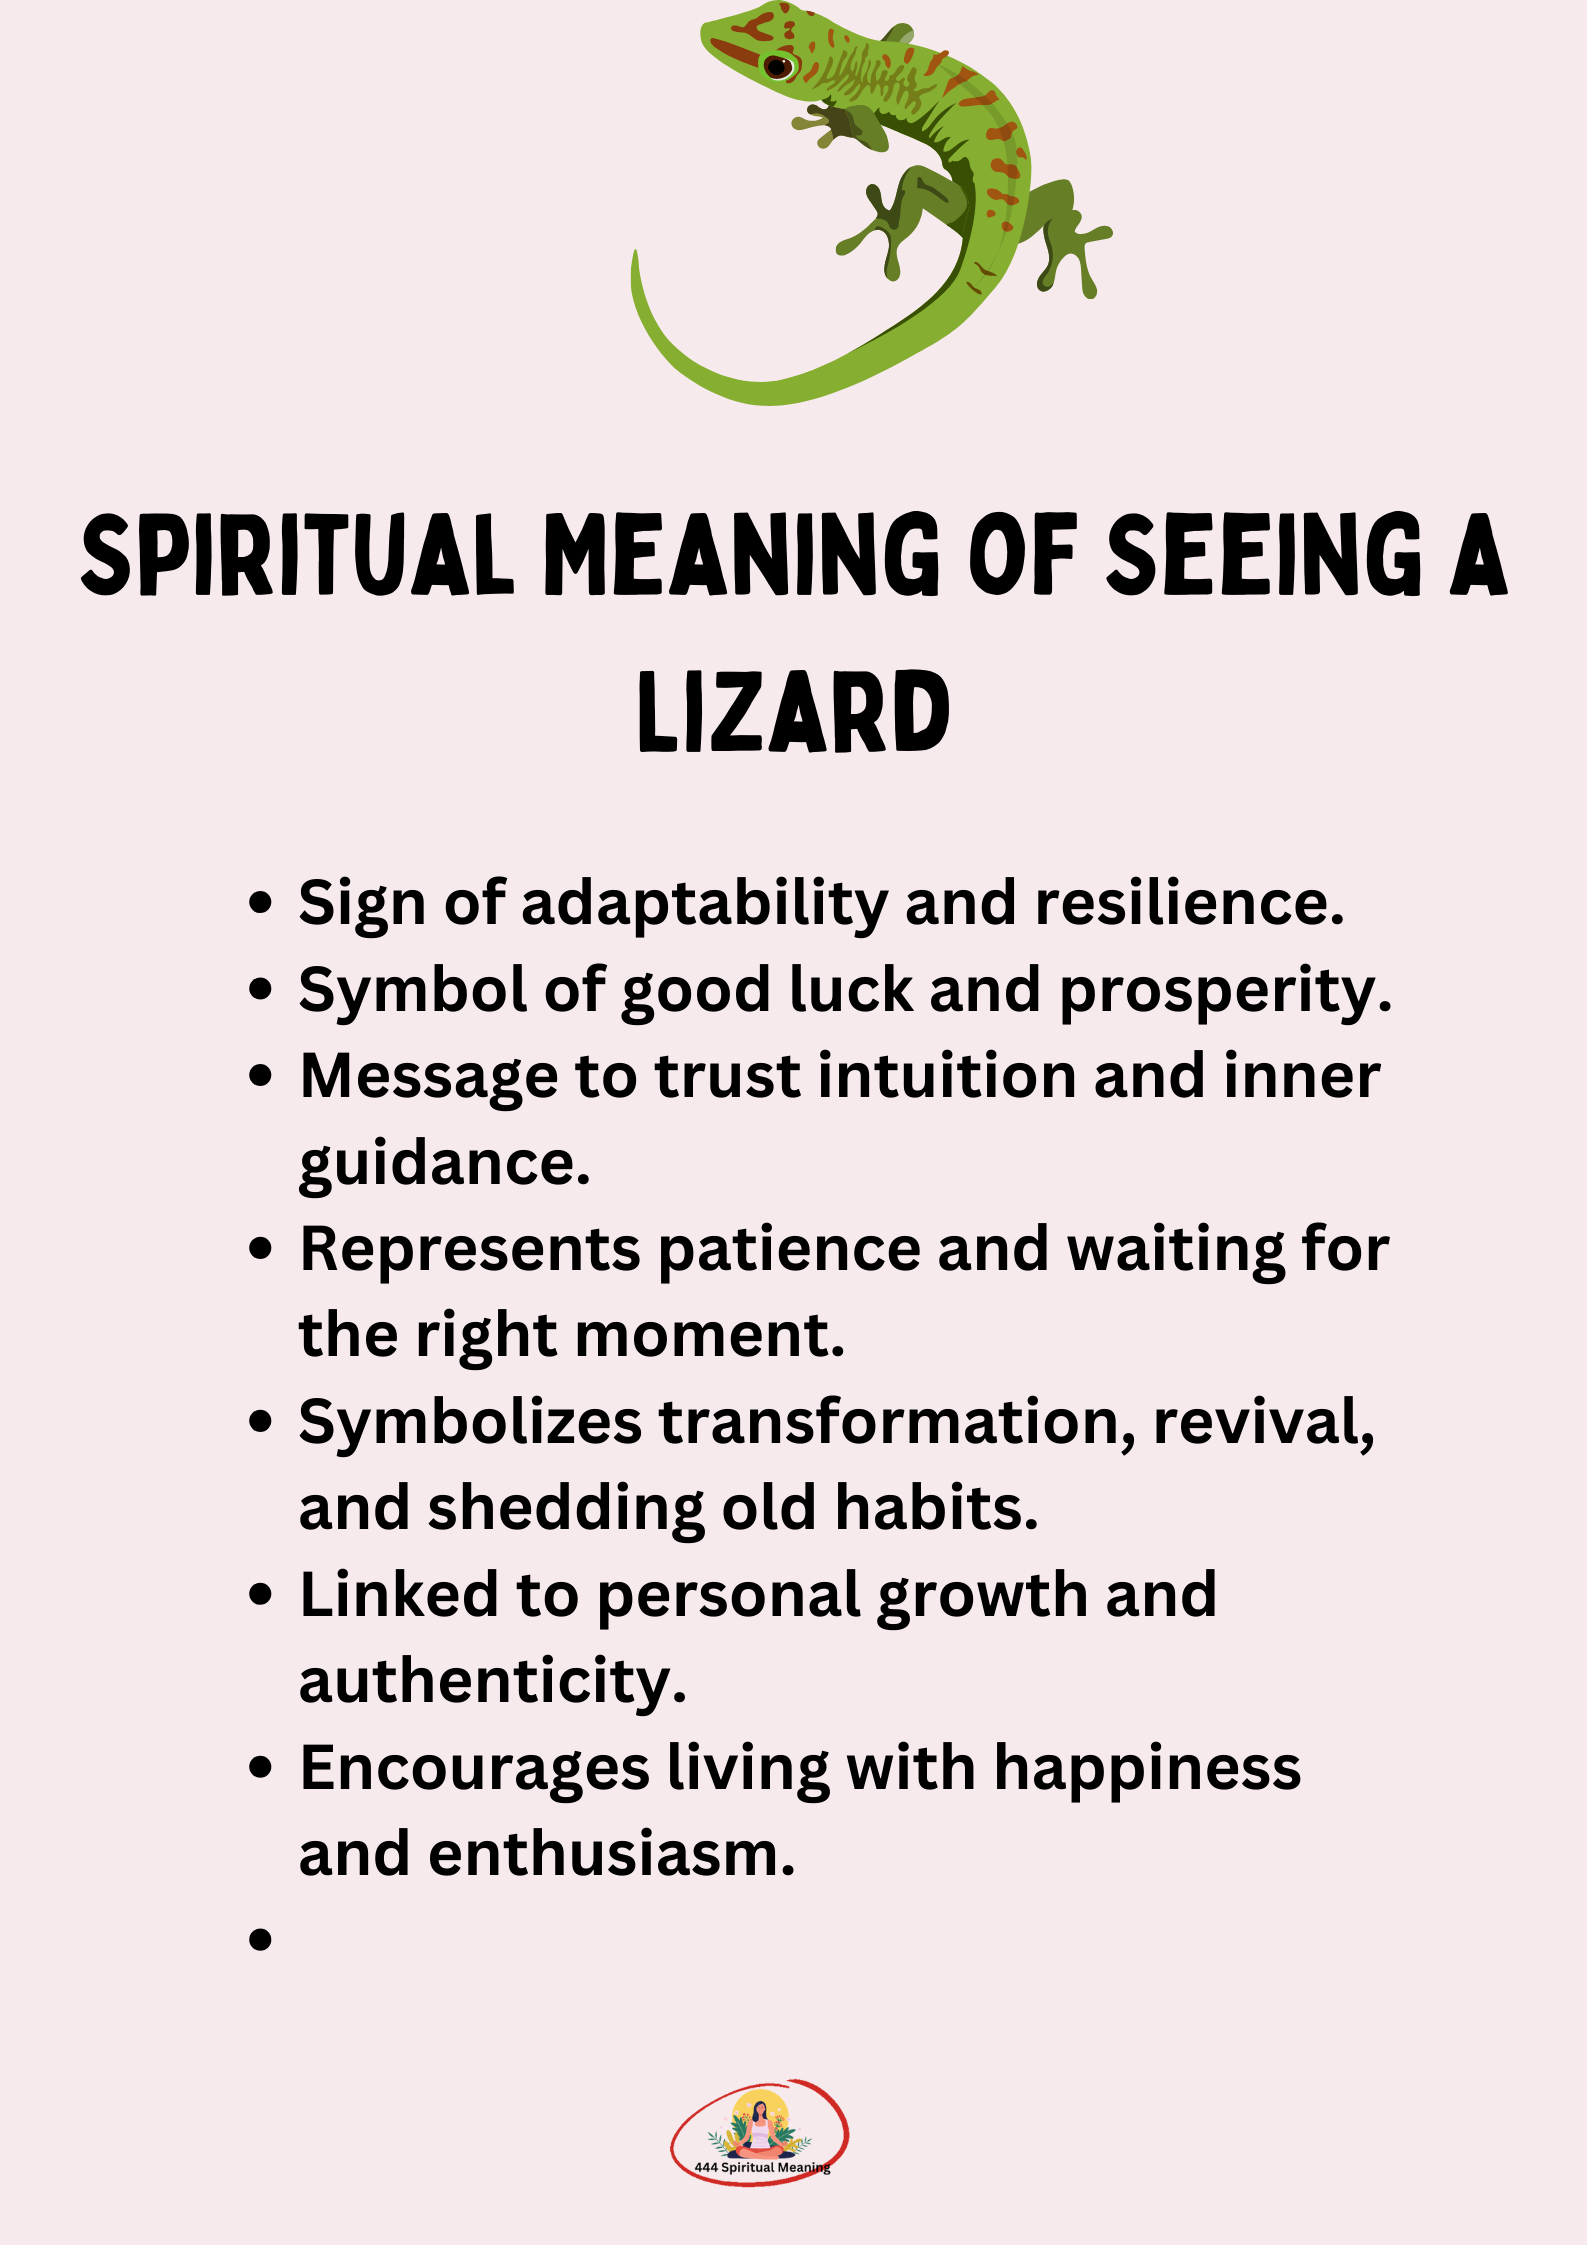 Spiritual Meaning of Seeing a Lizard